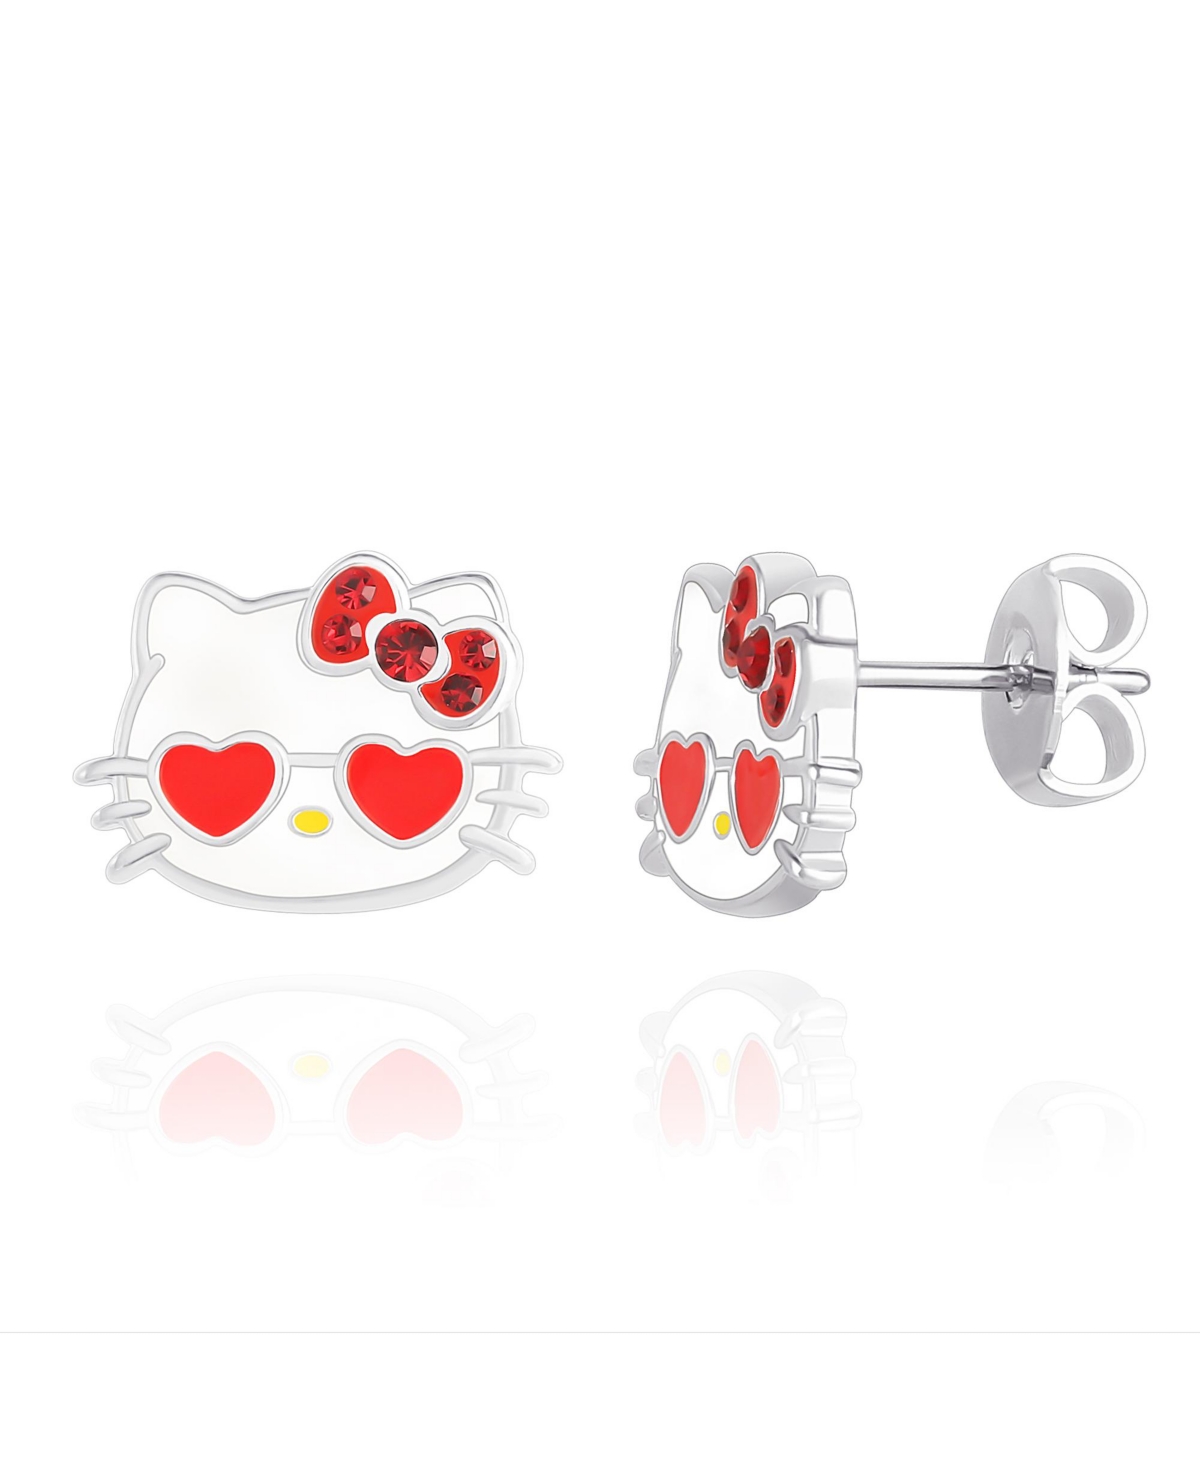 Sanrio Hello Kitty Silver Plated Pink Crystal and Enamel Heart Sunglasses Stud Earrings - Red, white